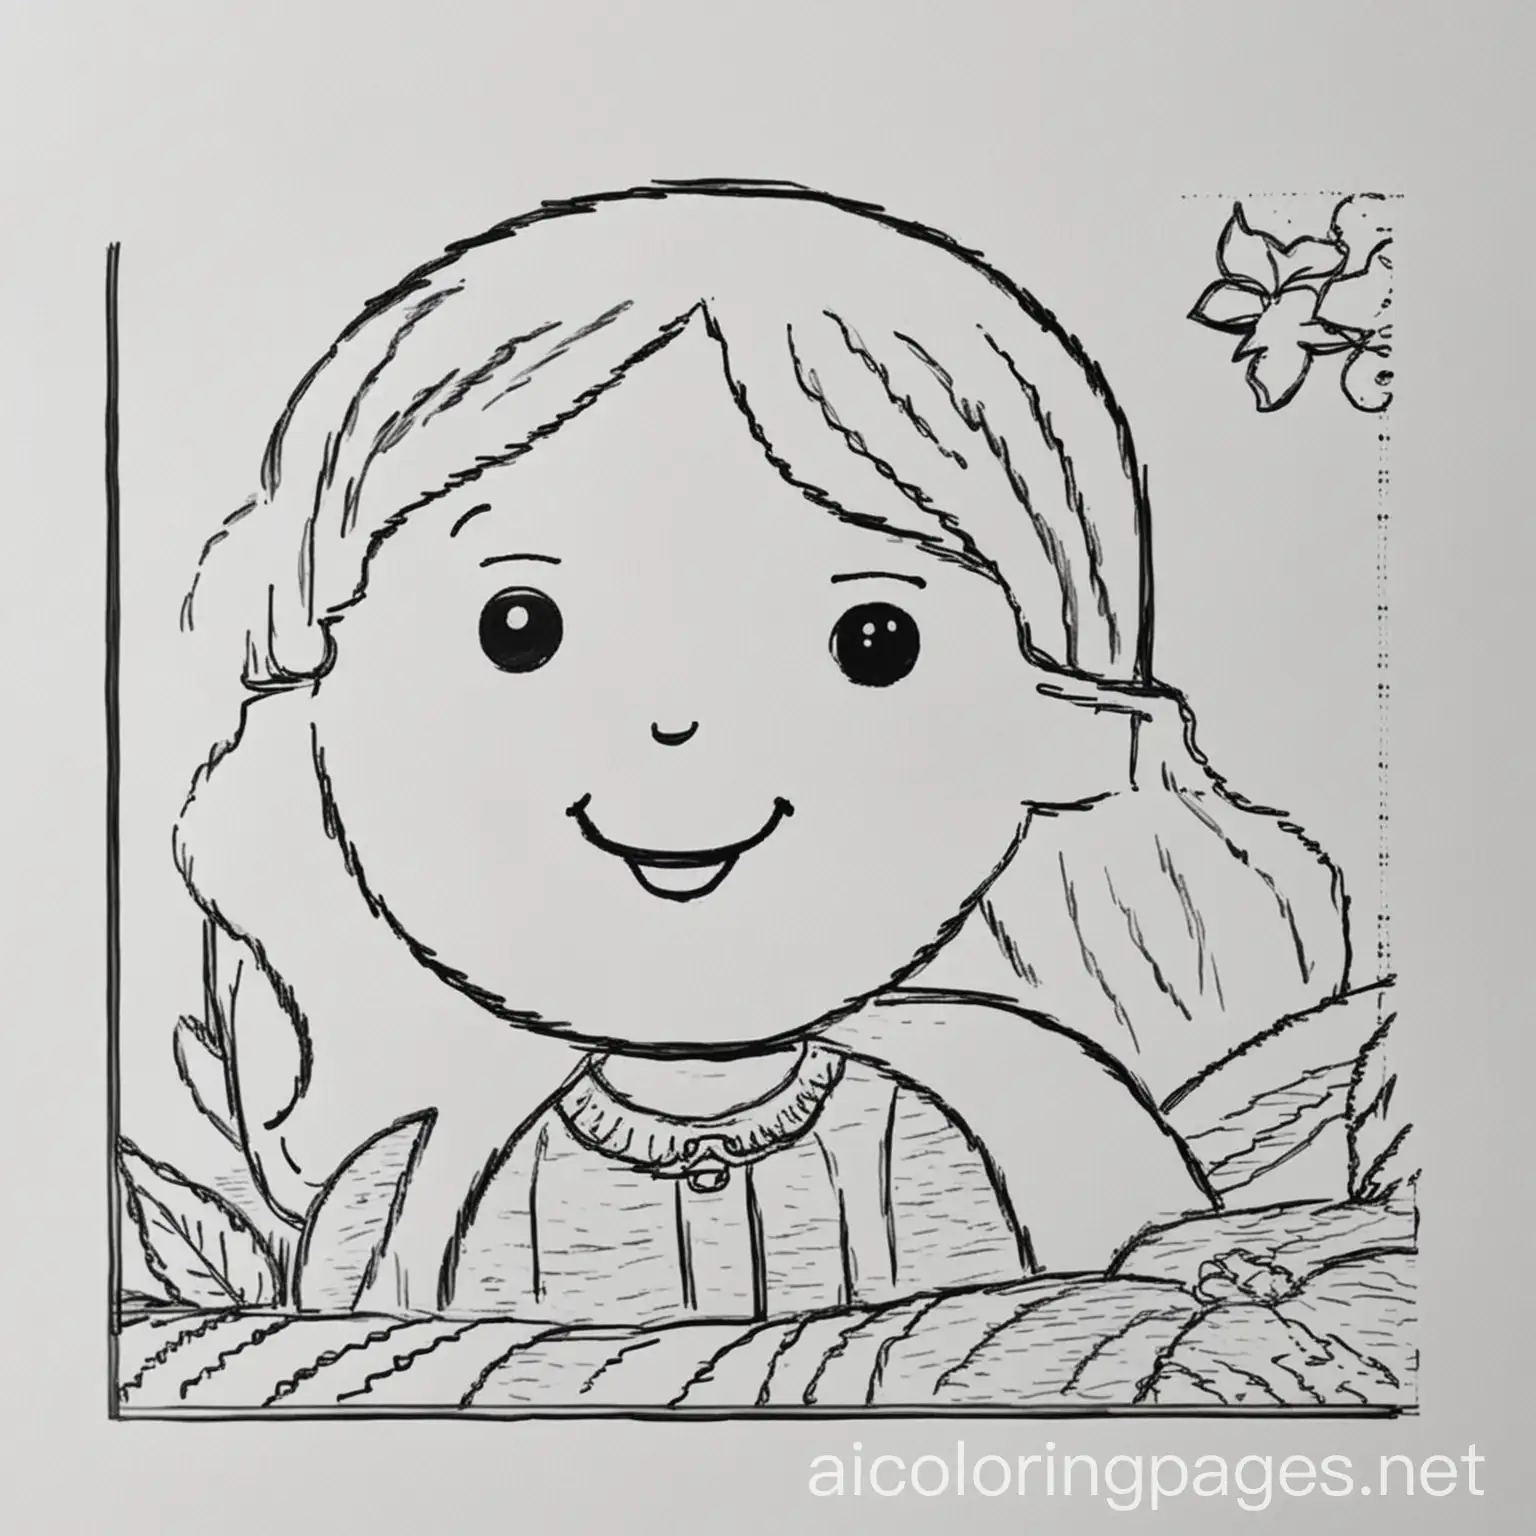 F, Coloring Page, black and white, line art, white background, Simplicity, Ample White Space. The background of the coloring page is plain white to make it easy for young children to color within the lines. The outlines of all the subjects are easy to distinguish, making it simple for kids to color without too much difficulty